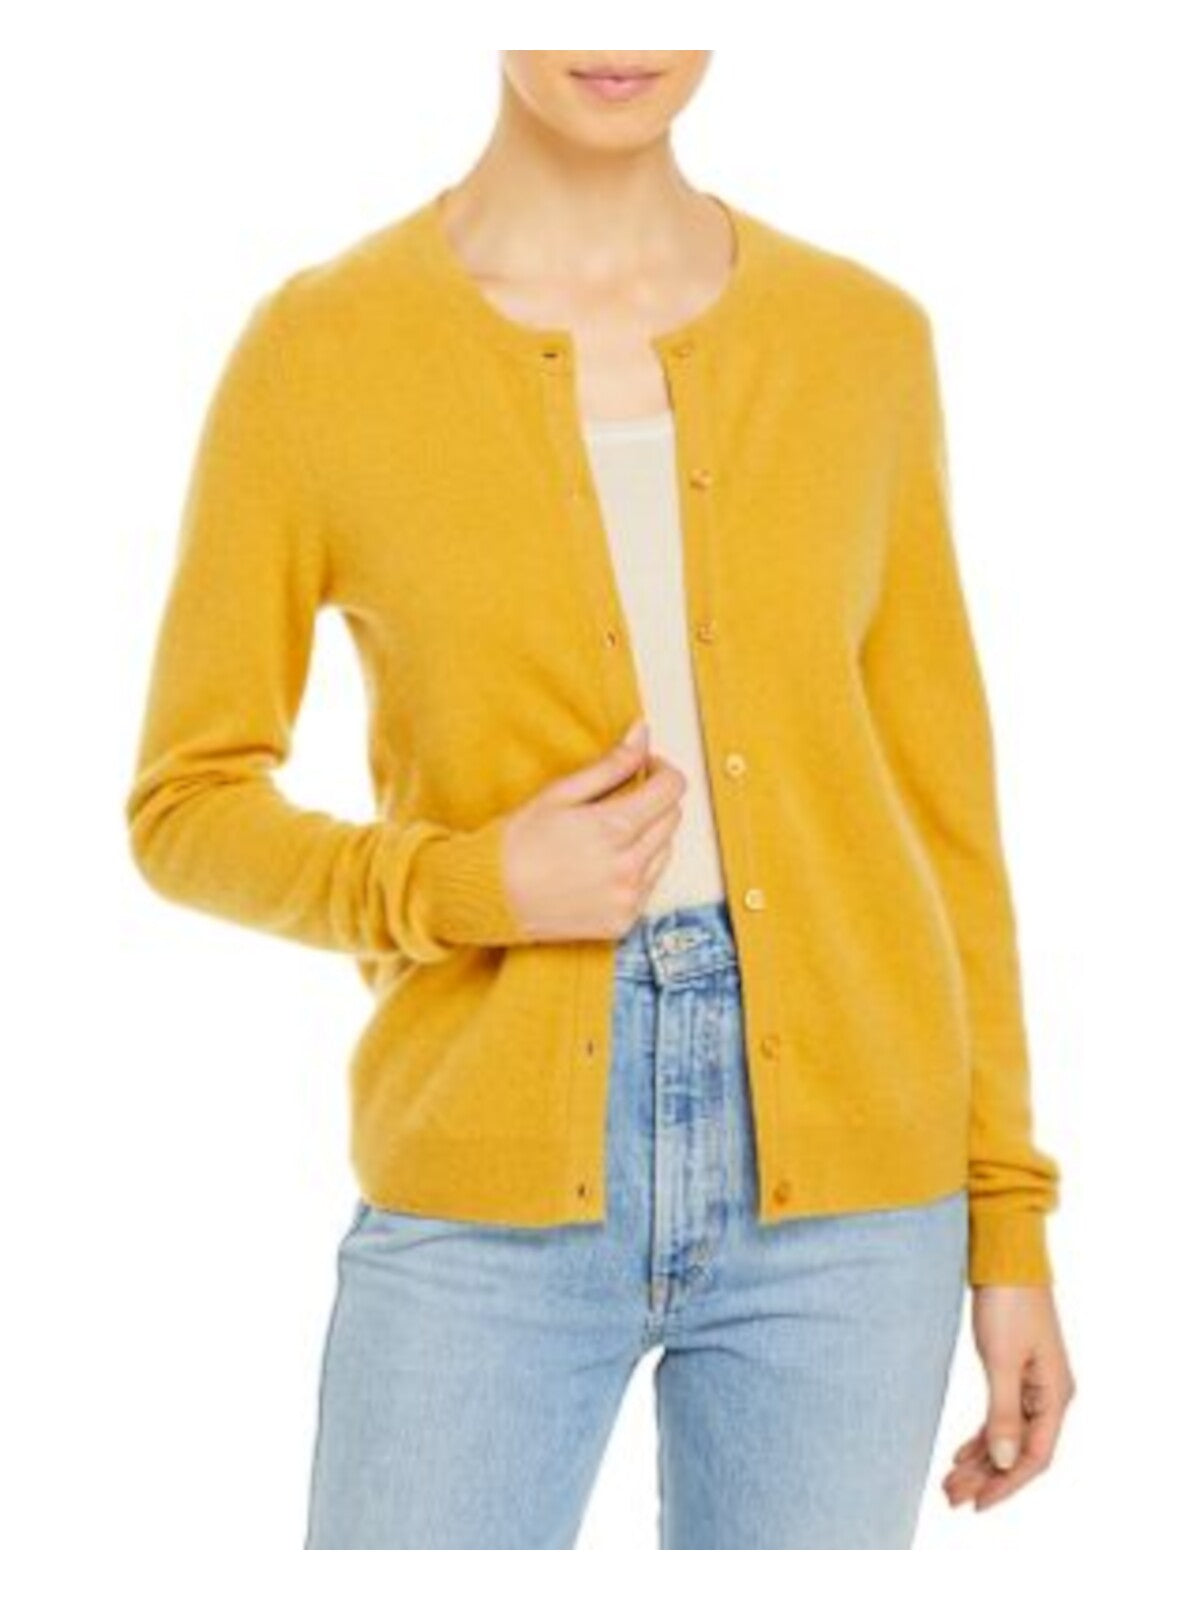 Designer Brand Womens Yellow Cashmere Long Sleeve Crew Neck Wear To Work Button Up Sweater S